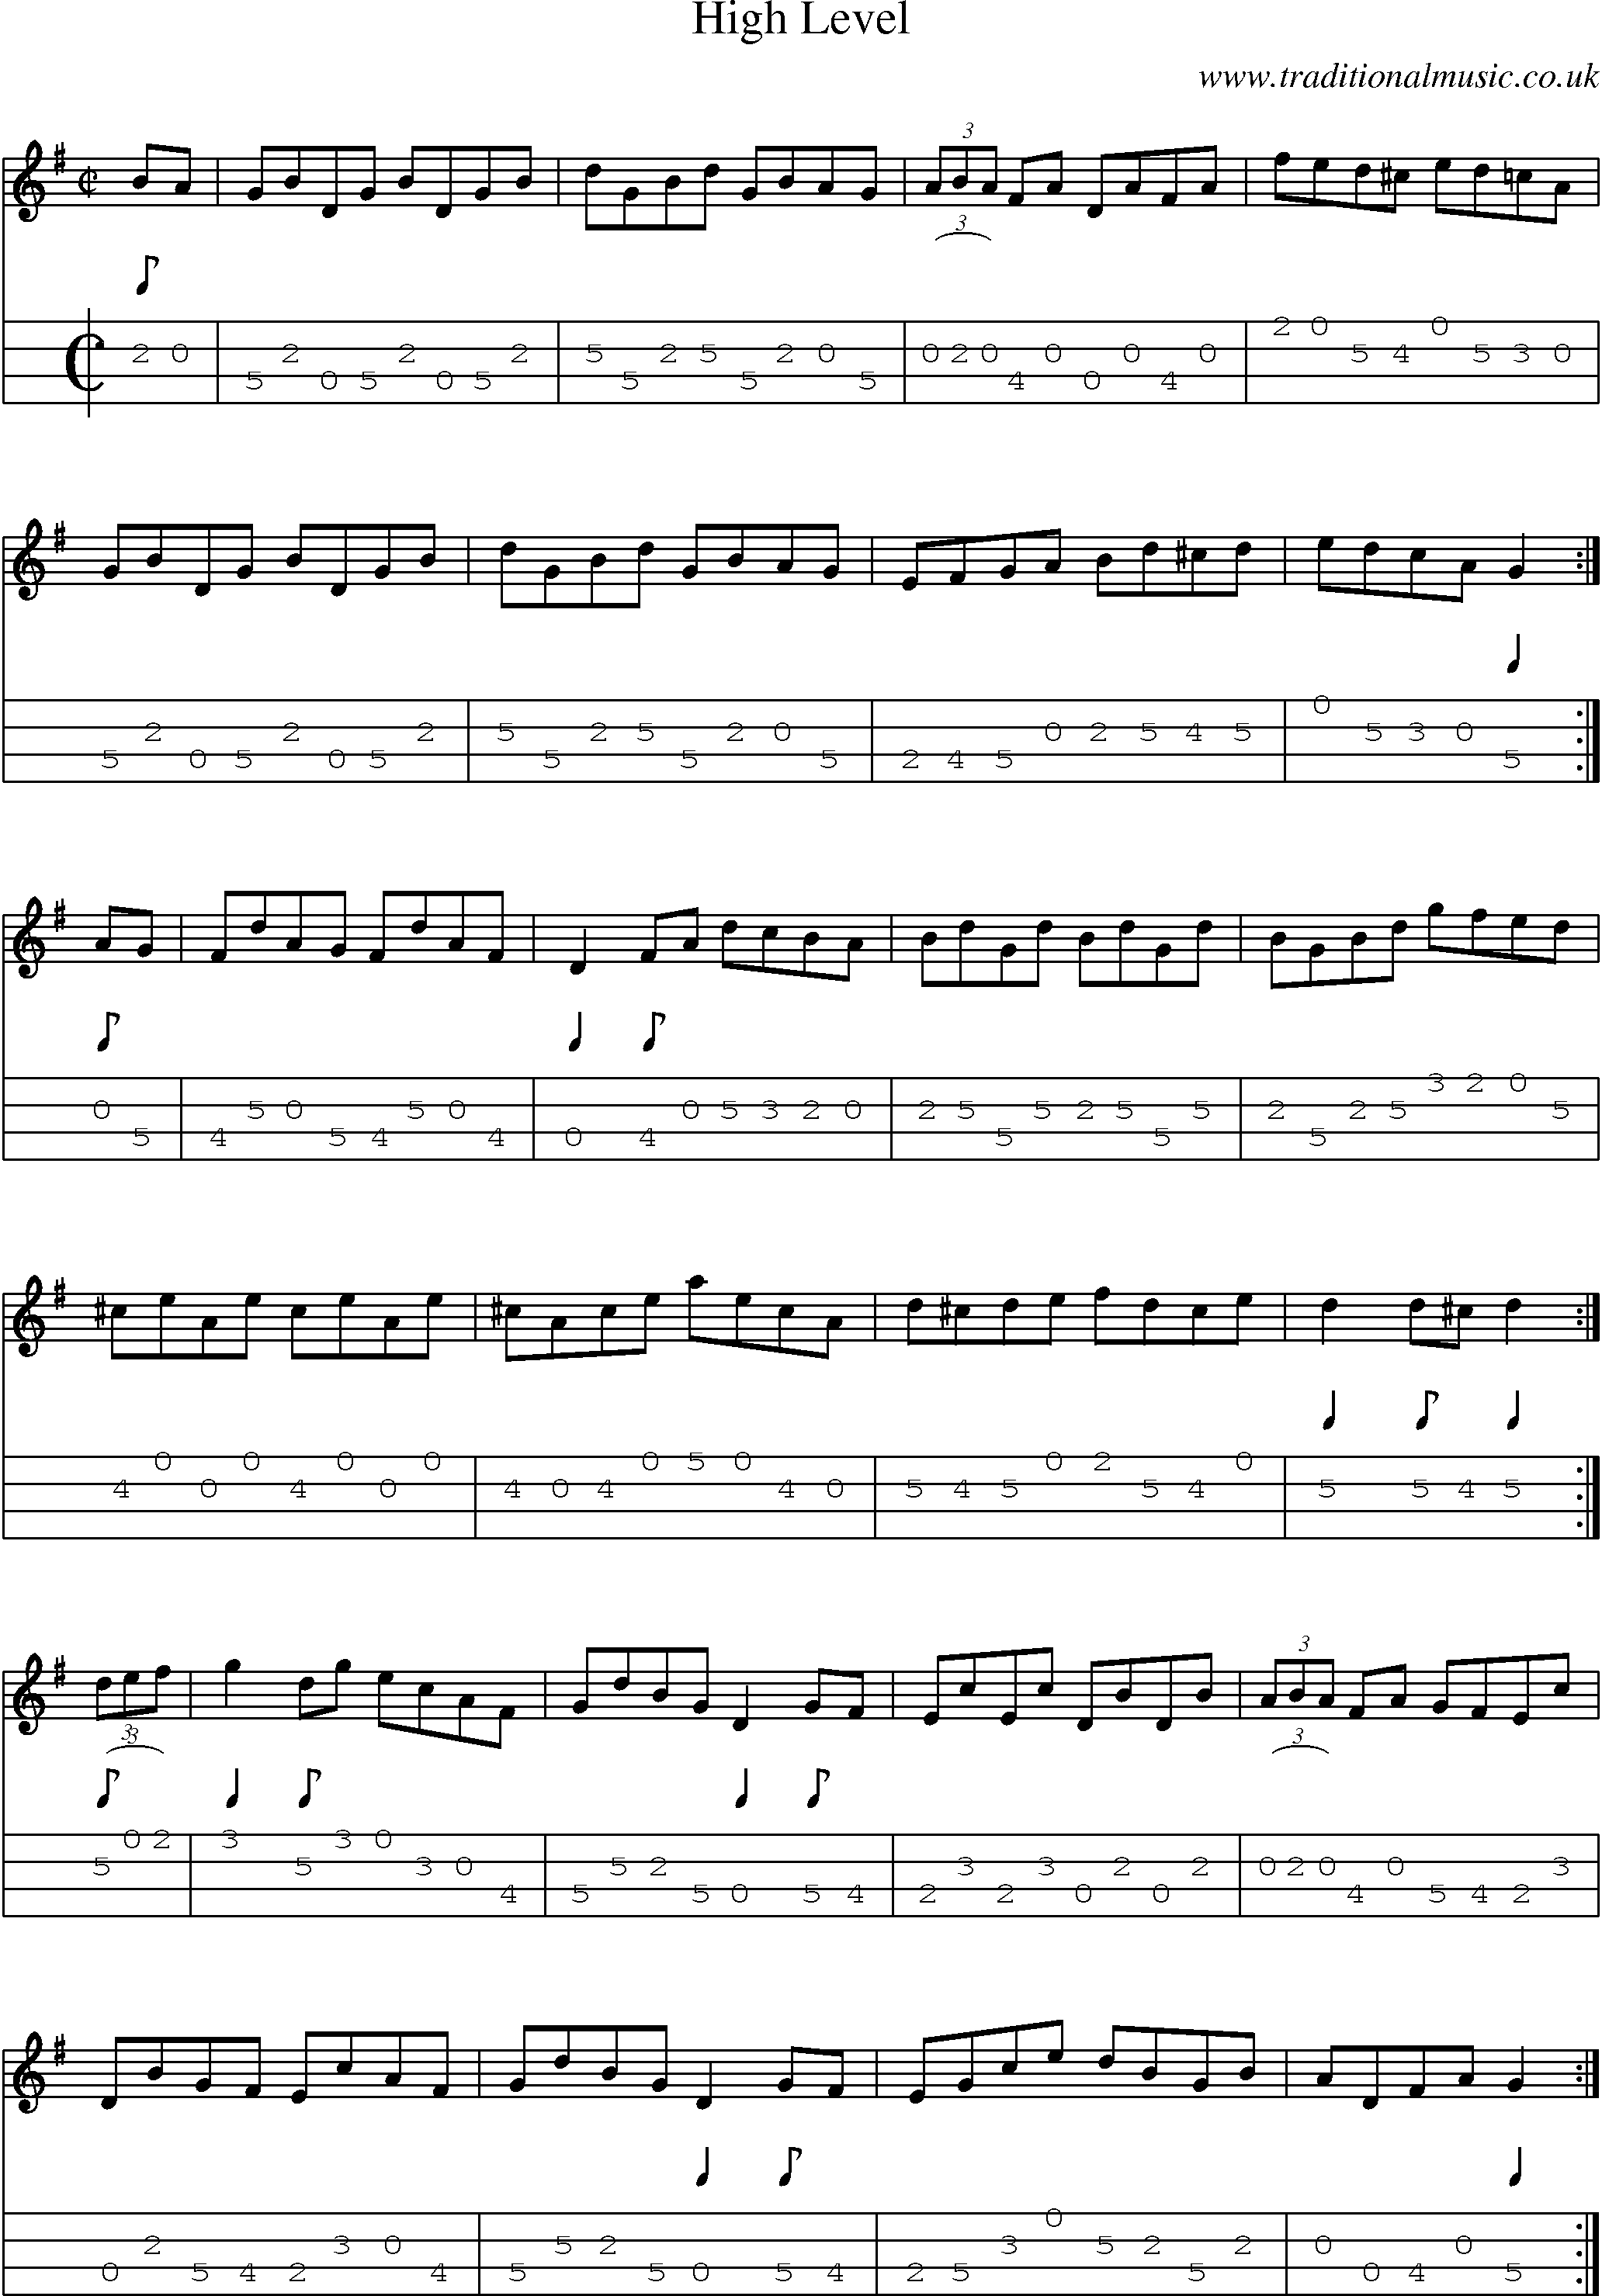 Music Score and Mandolin Tabs for High Level